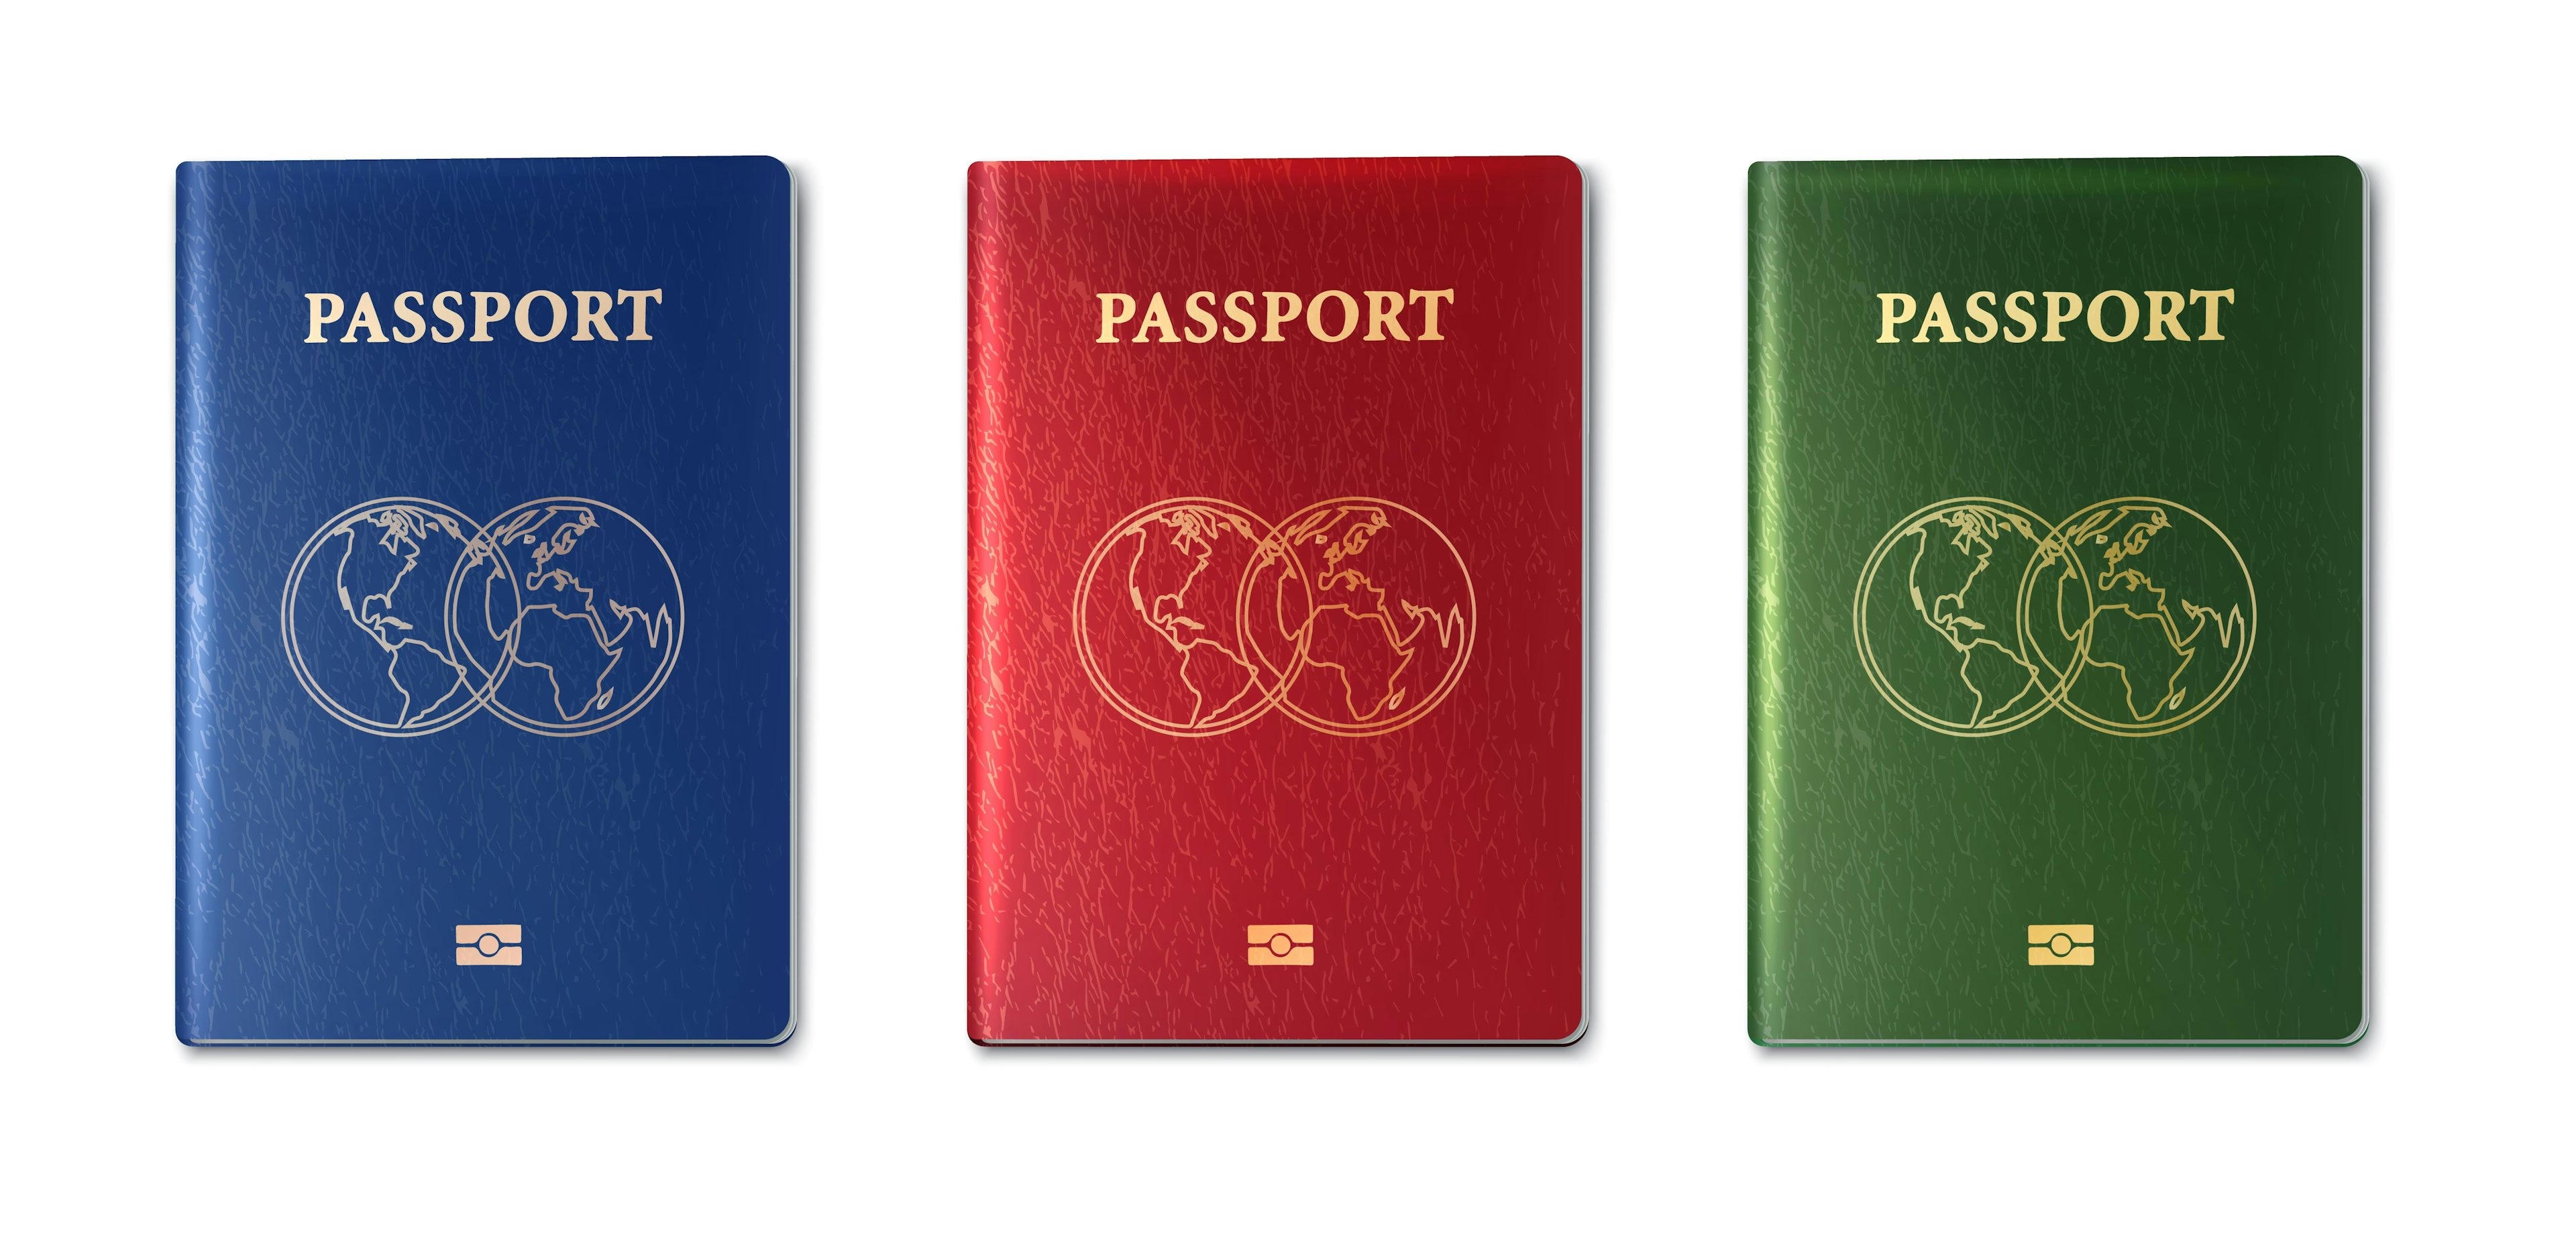 a picture set of three different passports, one blue, one red and one green